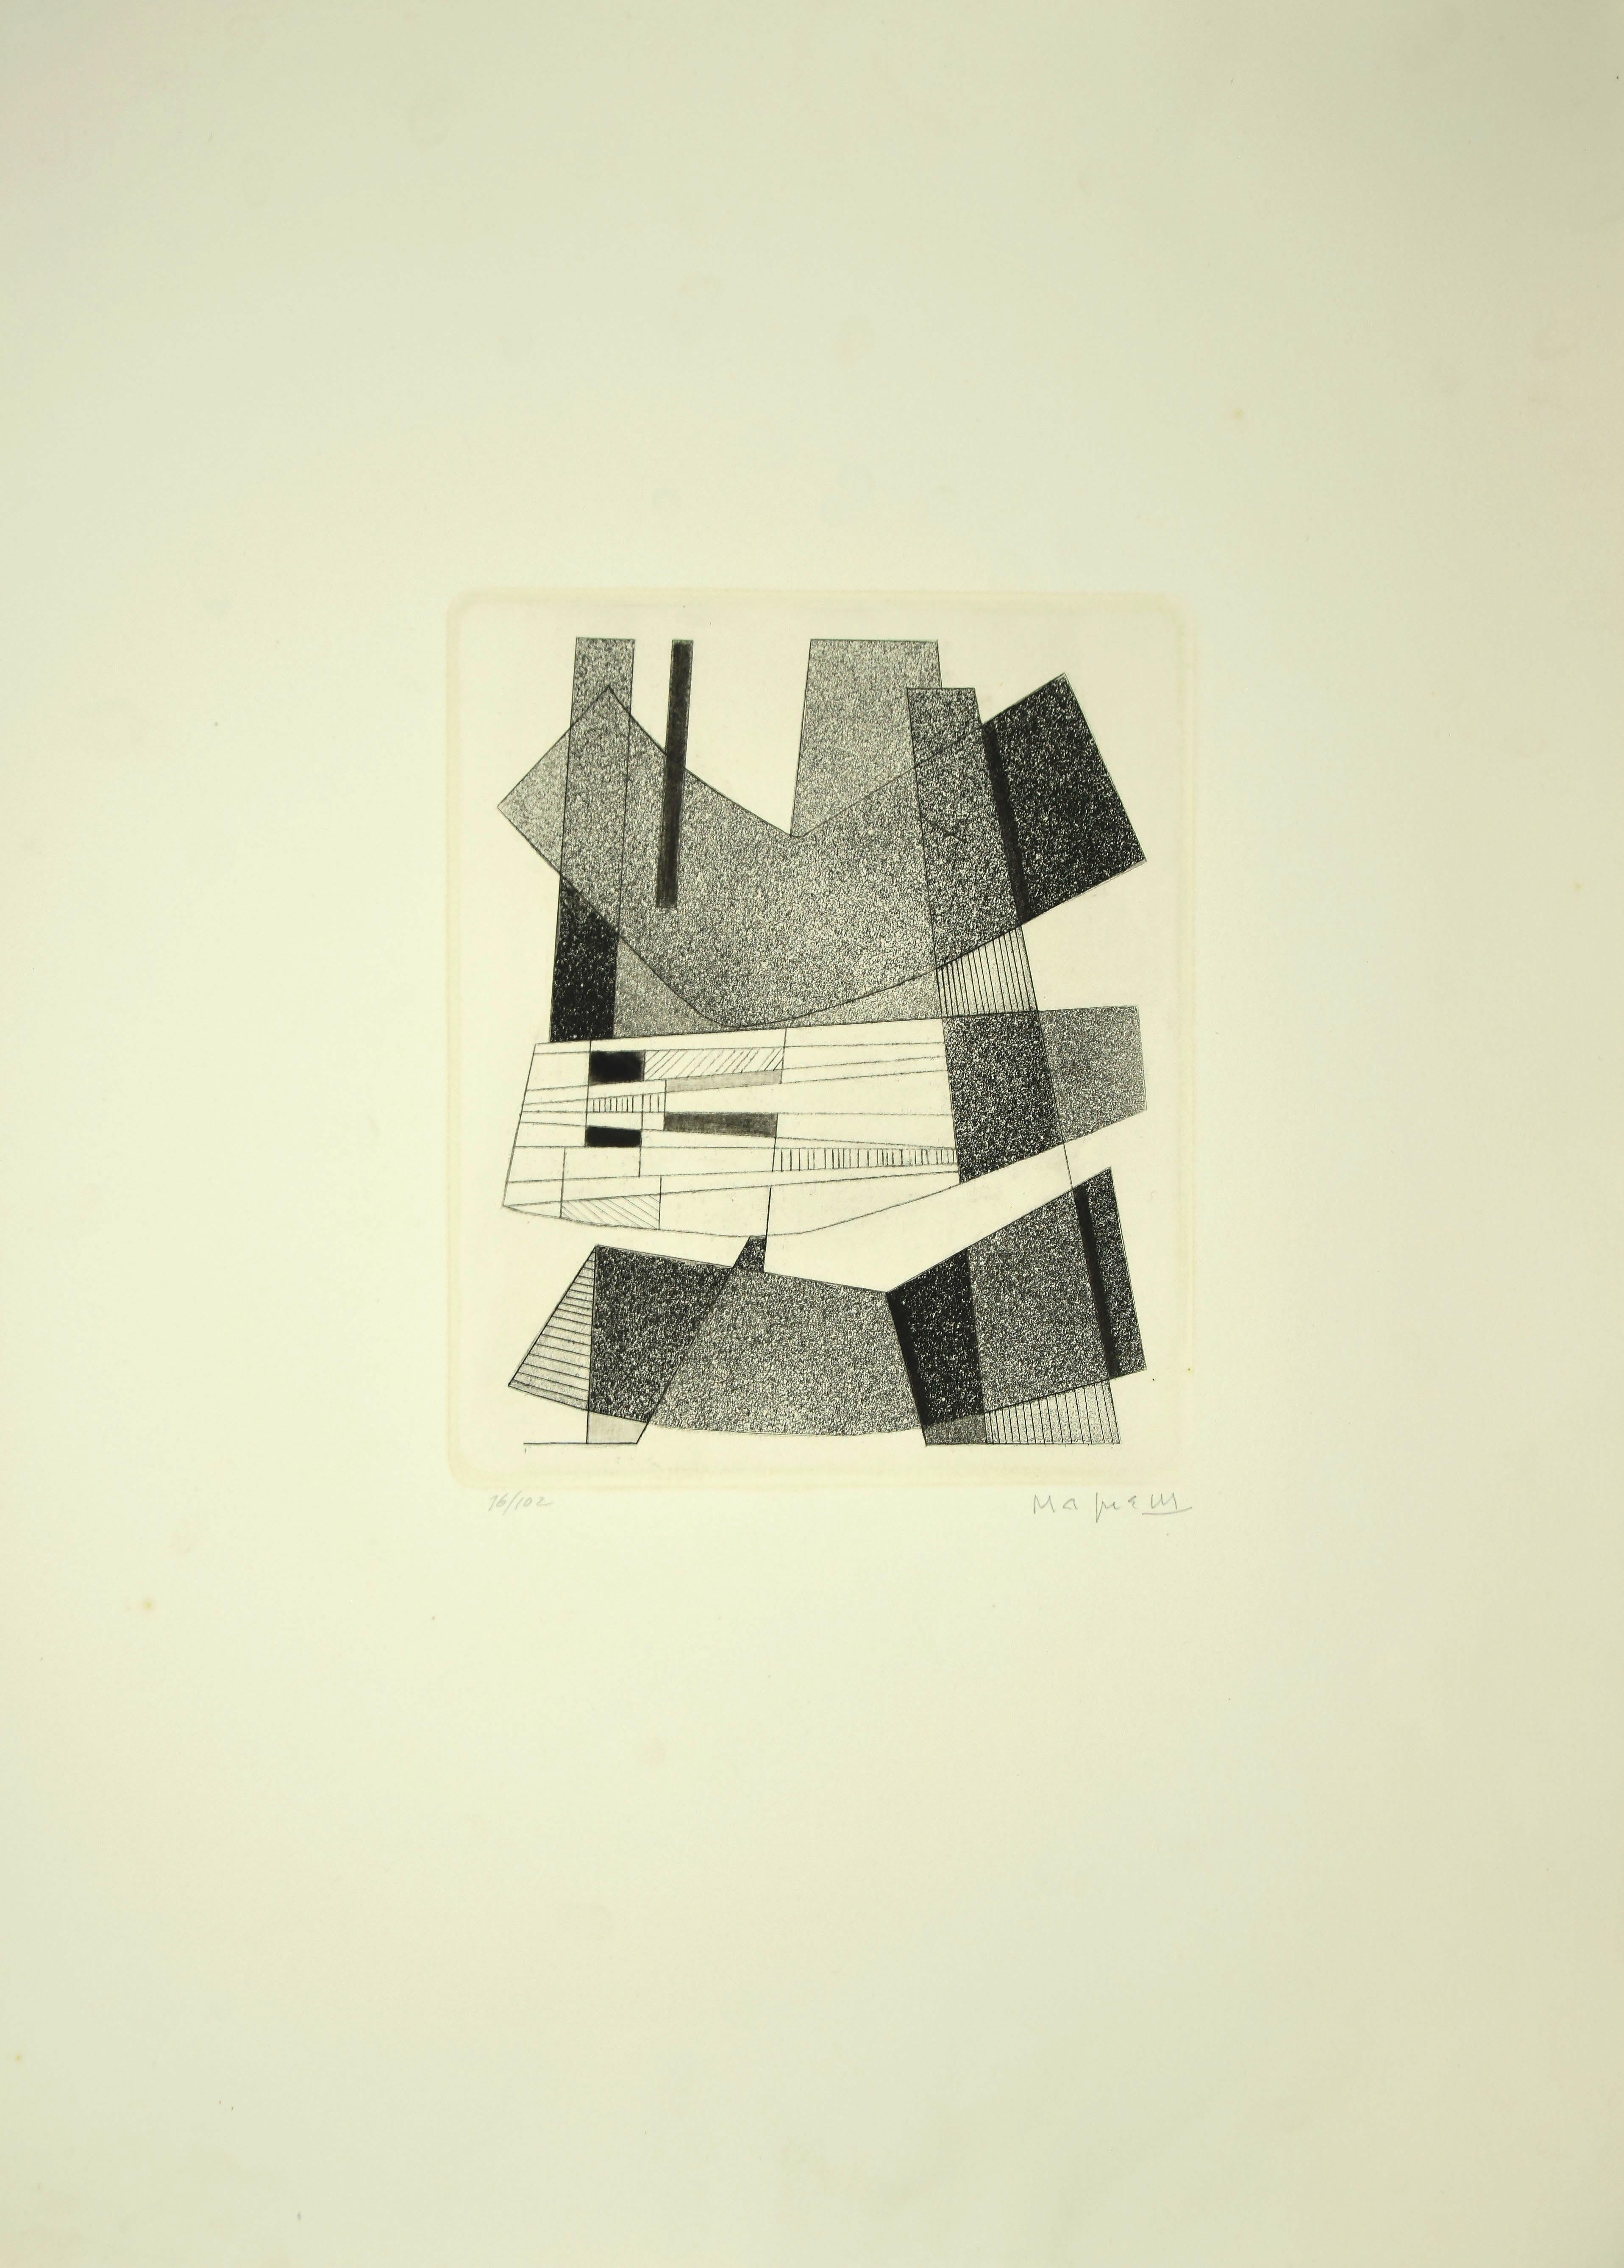 Geometric Black and White - Original Etching by A. Magnelli - 1964 - Print by Alberto Magnelli